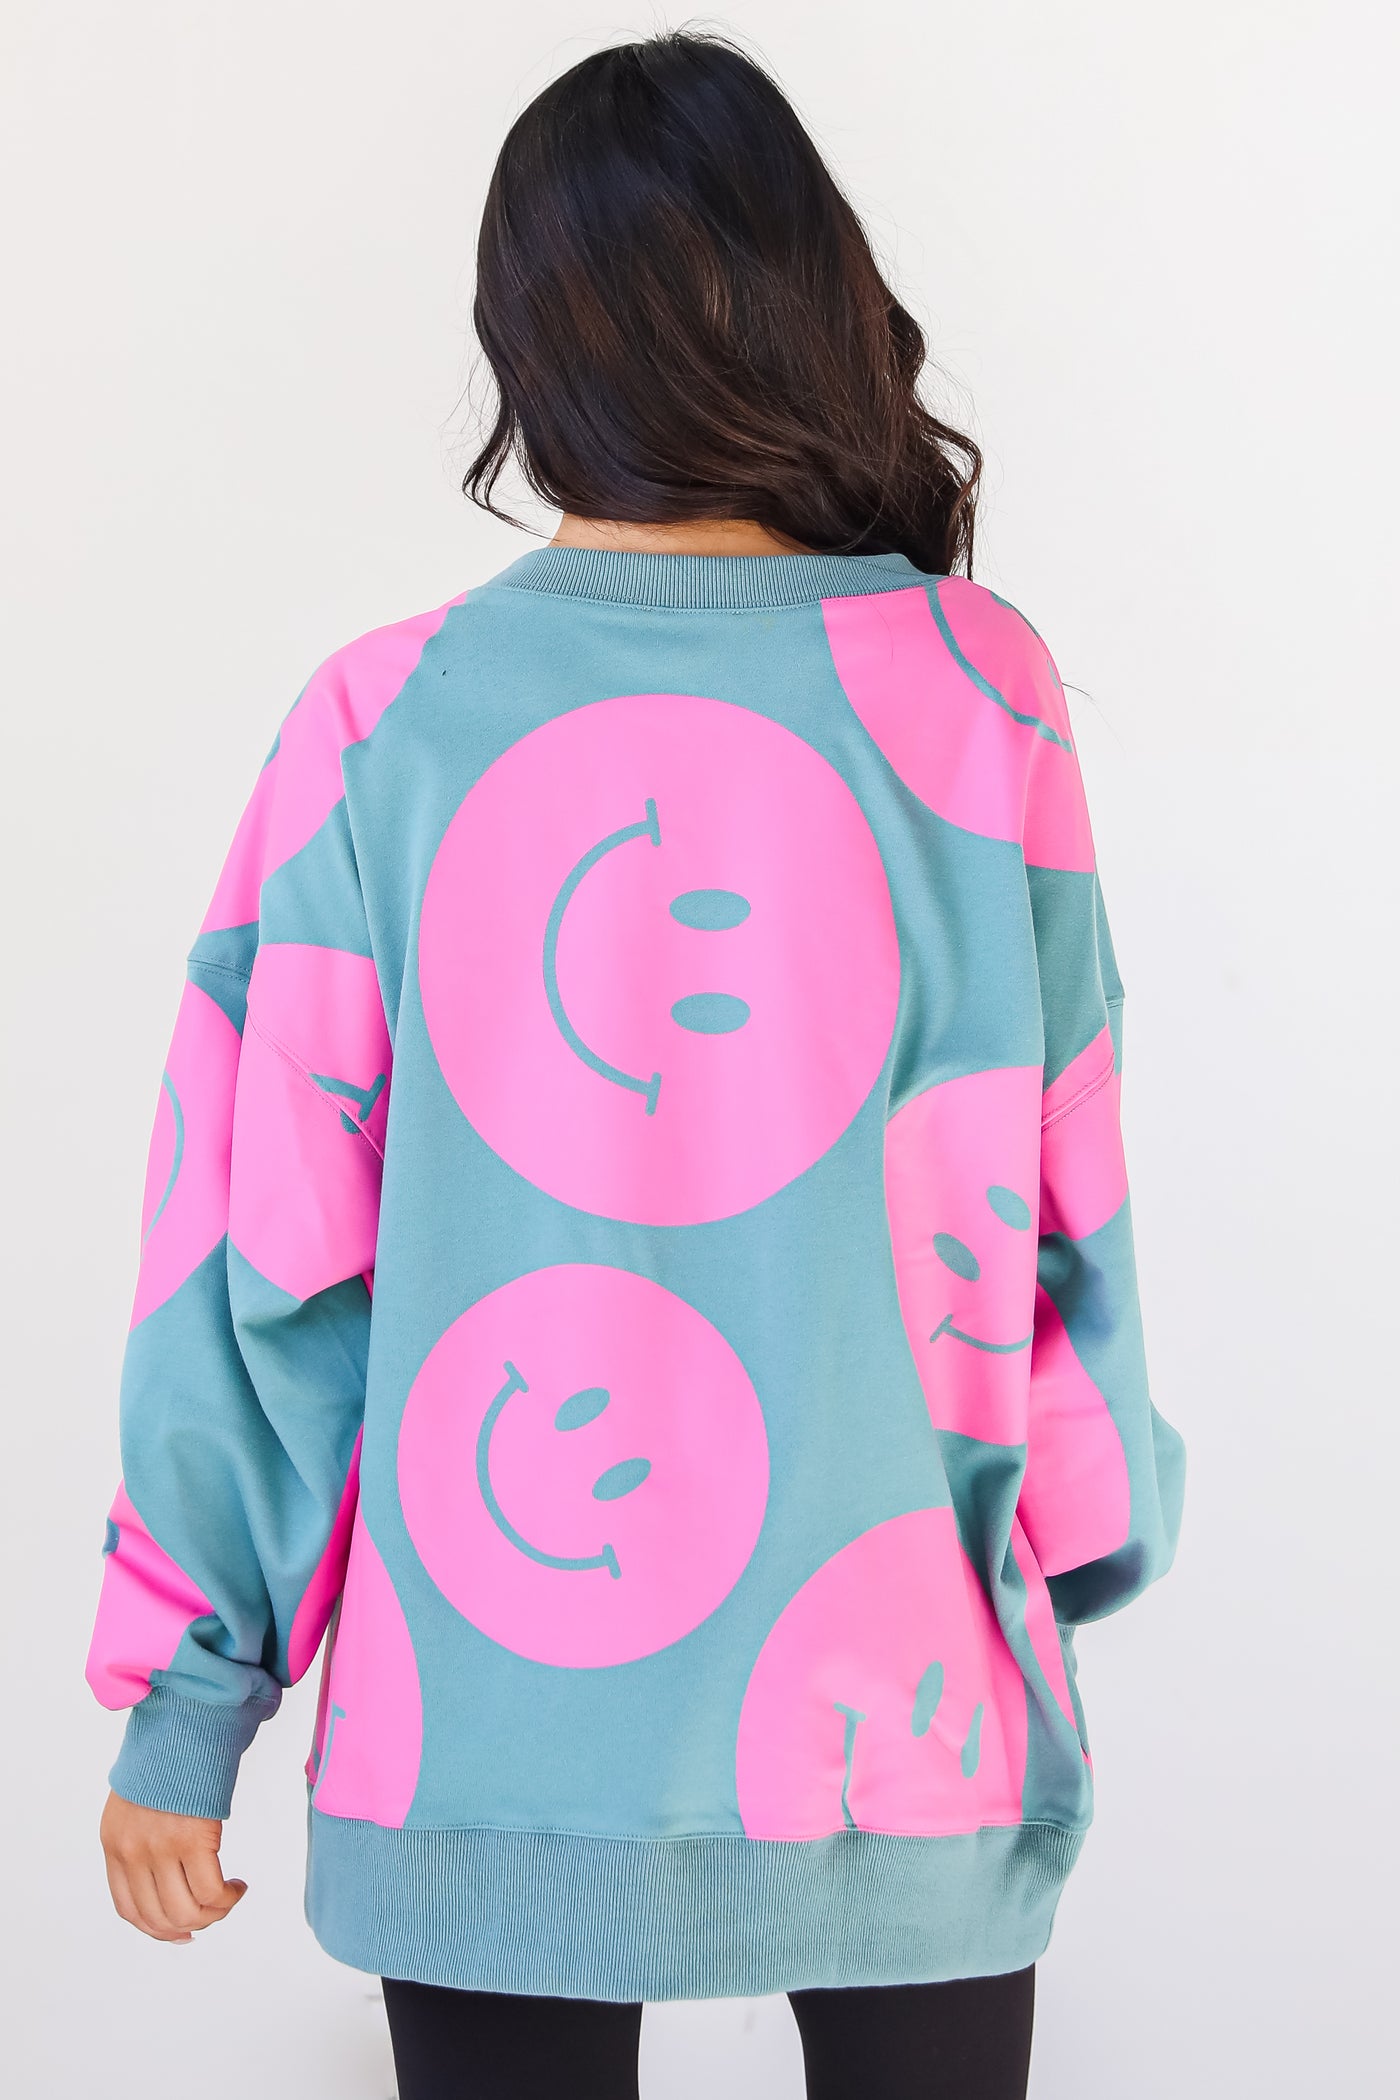 Smiley Face Pullover back view